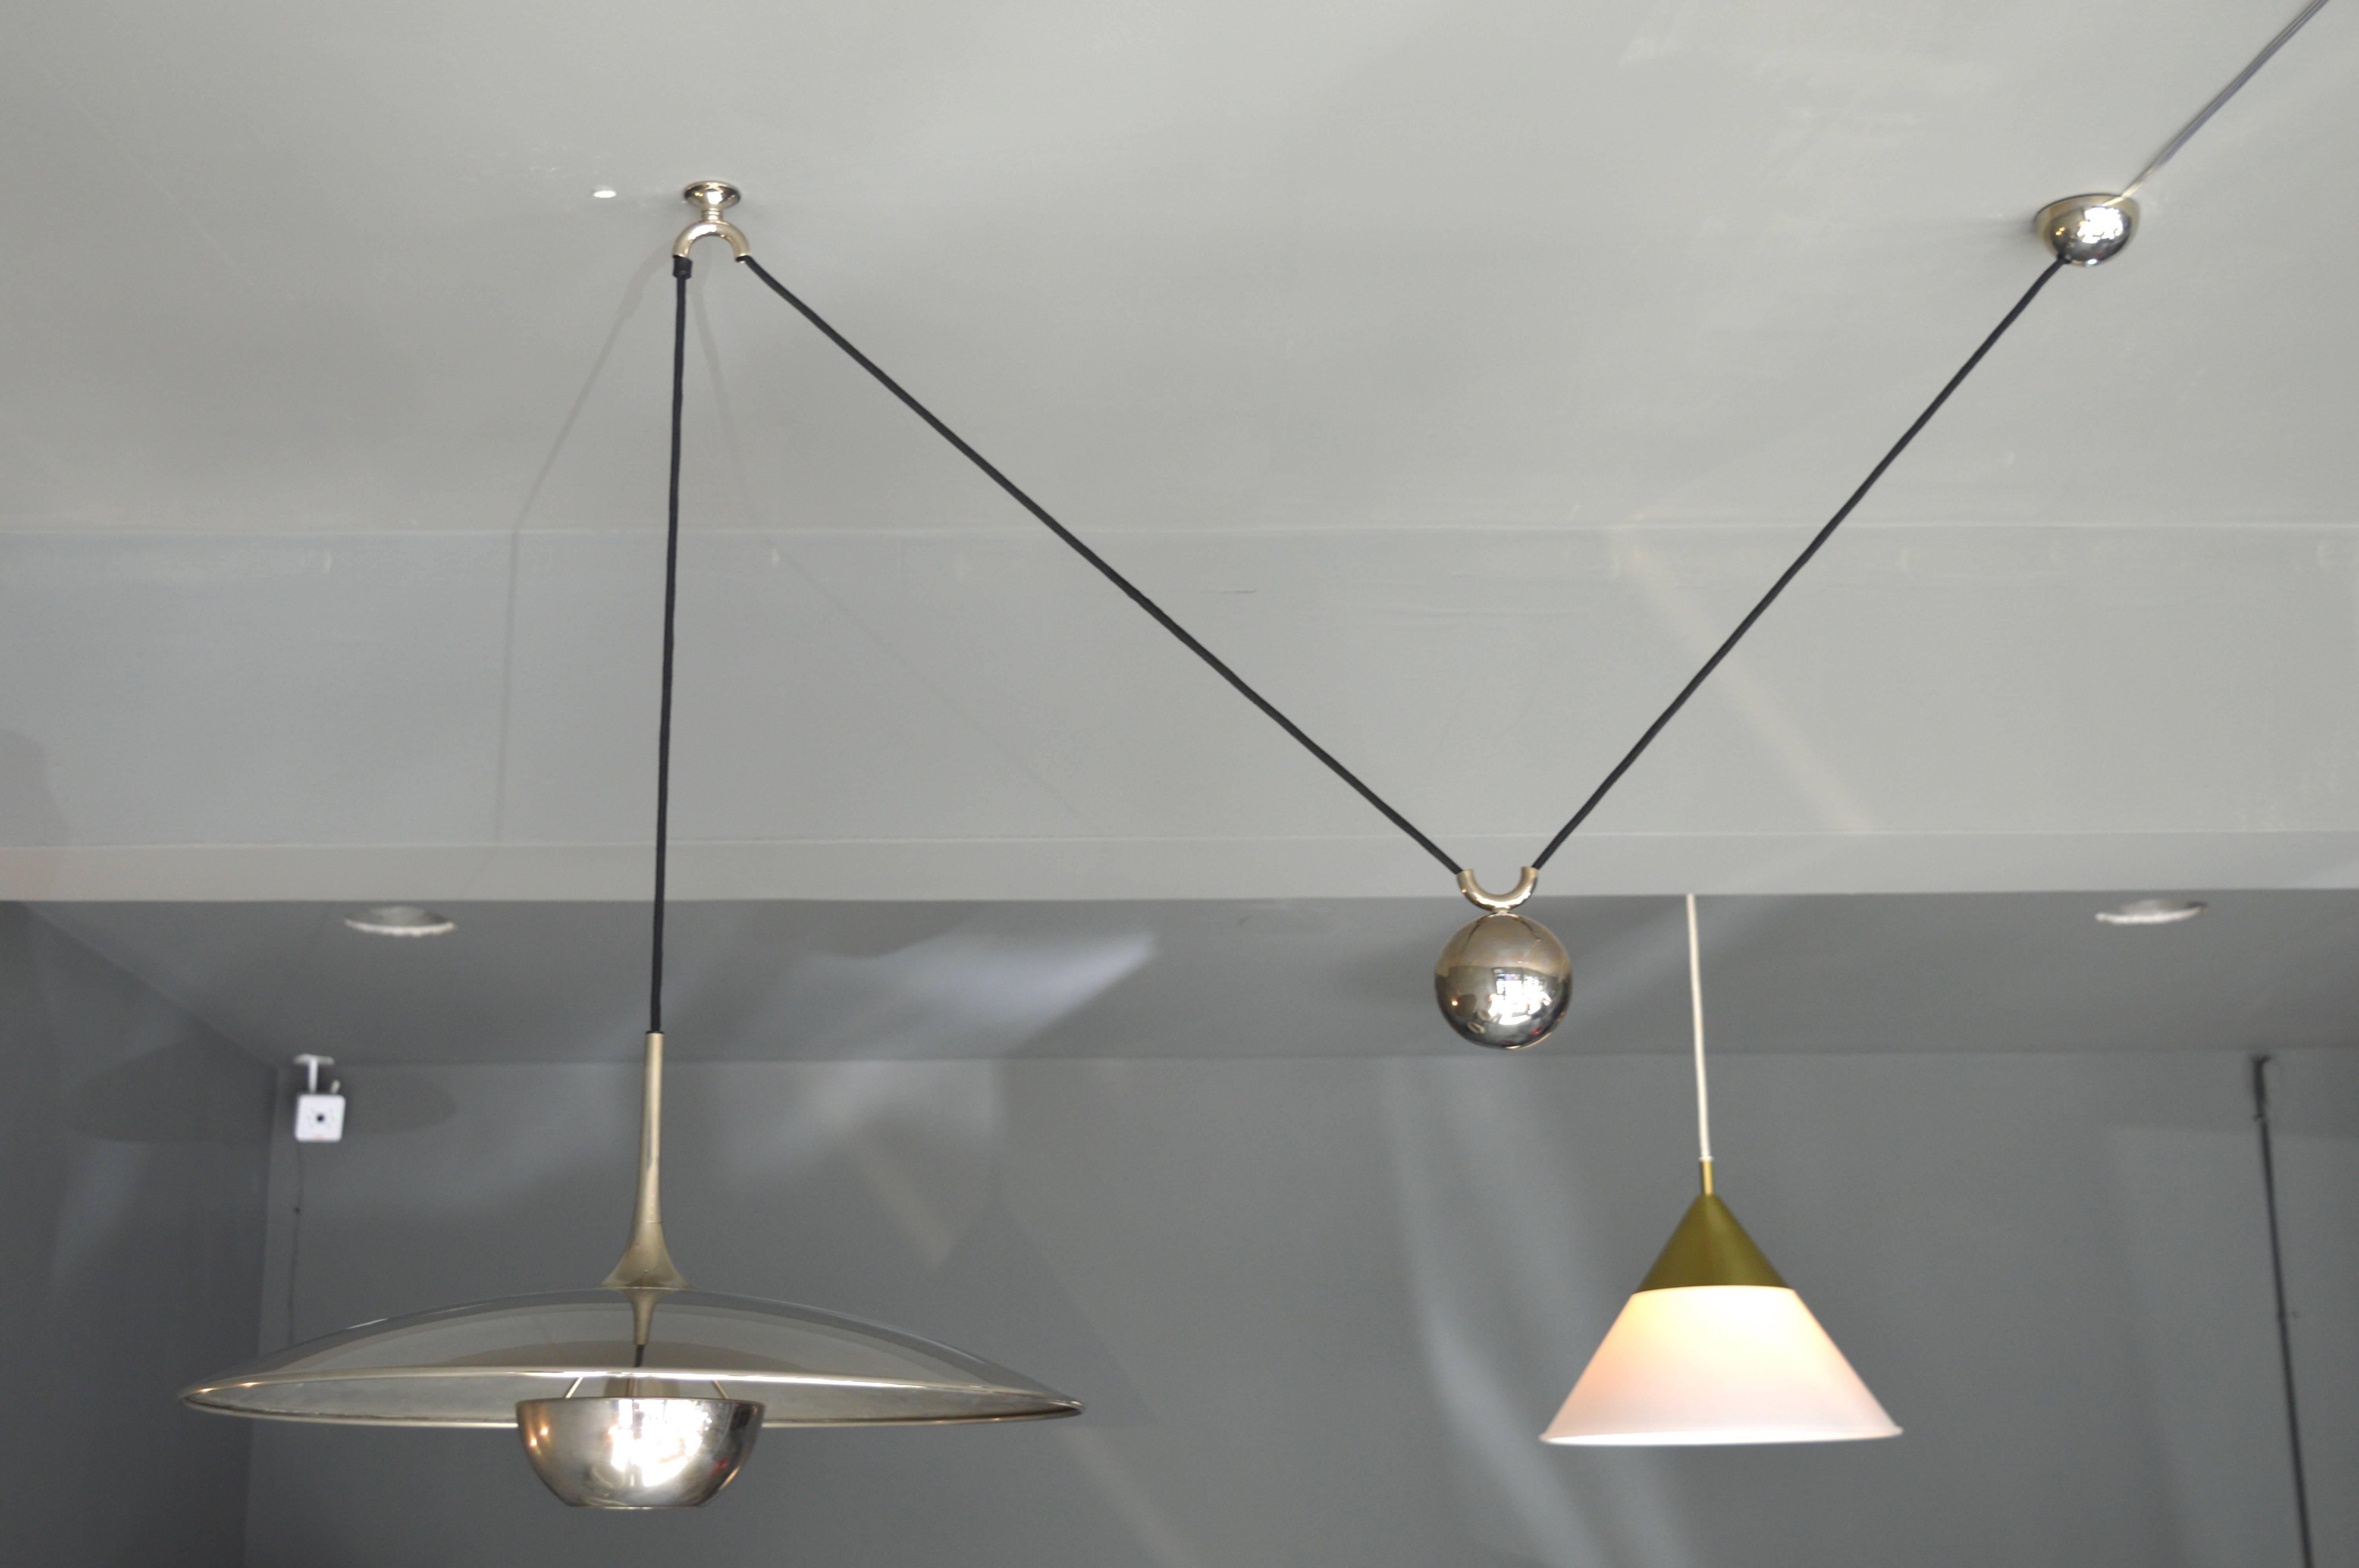 Handsome counter balance pendant by German design house Florian Schulz. Nickel hardware includes, diffuser, canopy and counter weight. Beautiful design. Looks great on and off. Overall height is adjustable from 15